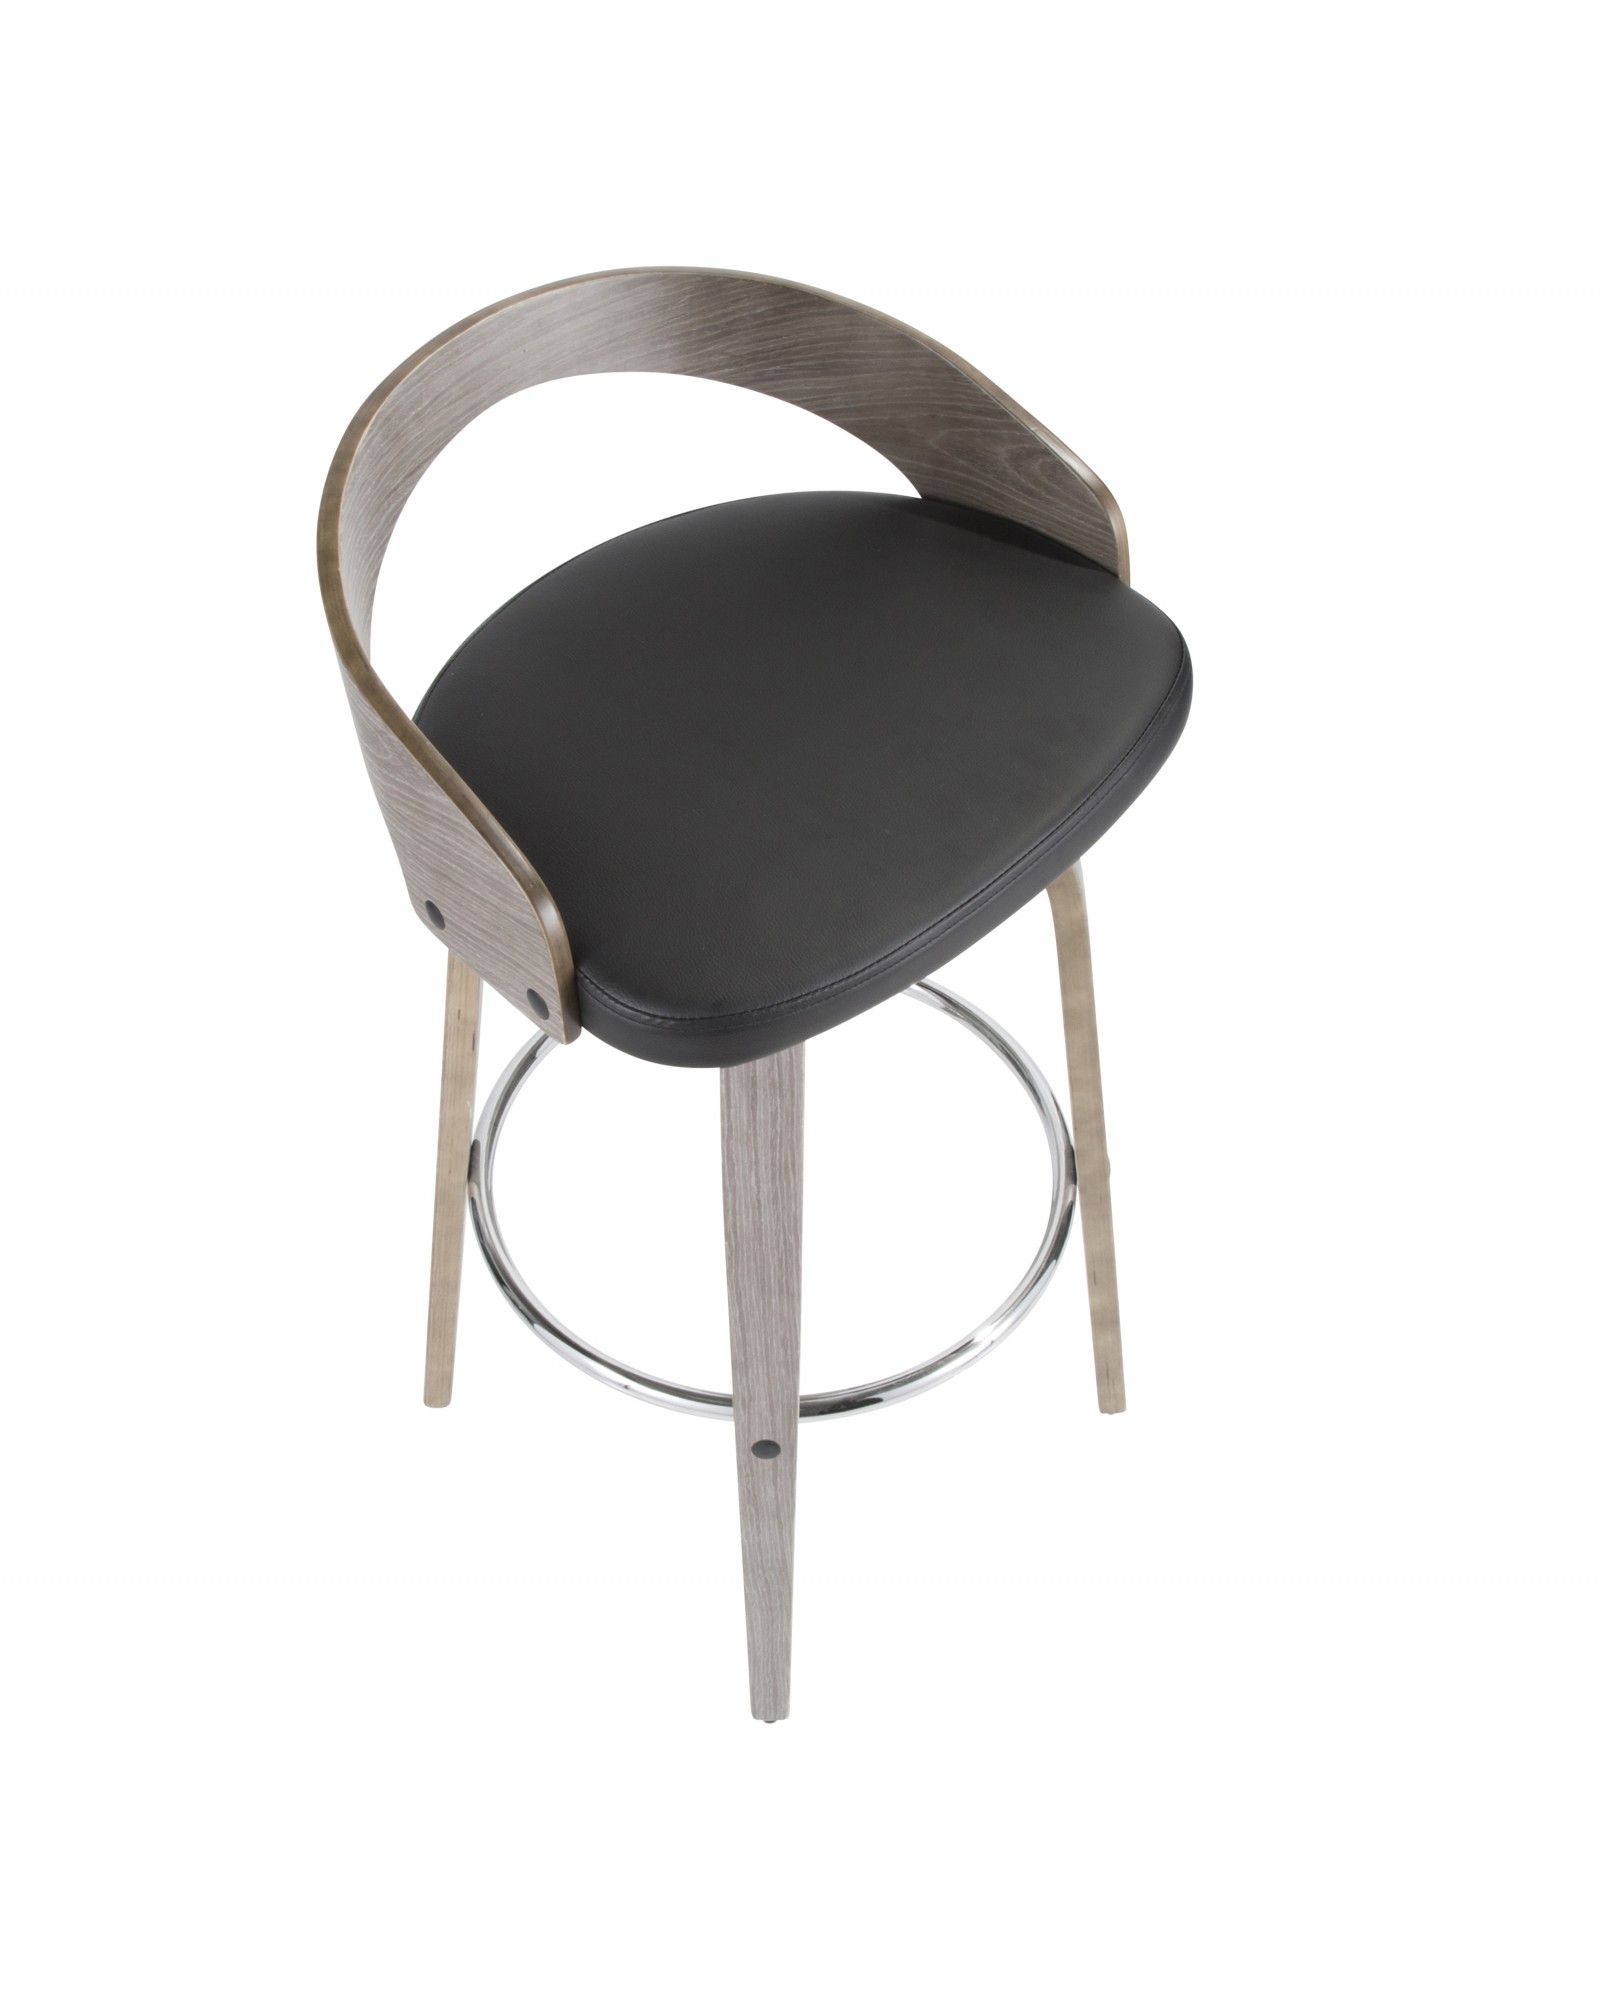 Grotto Mid-Century Modern Barstool with Light Grey Wood and Black Faux Leather